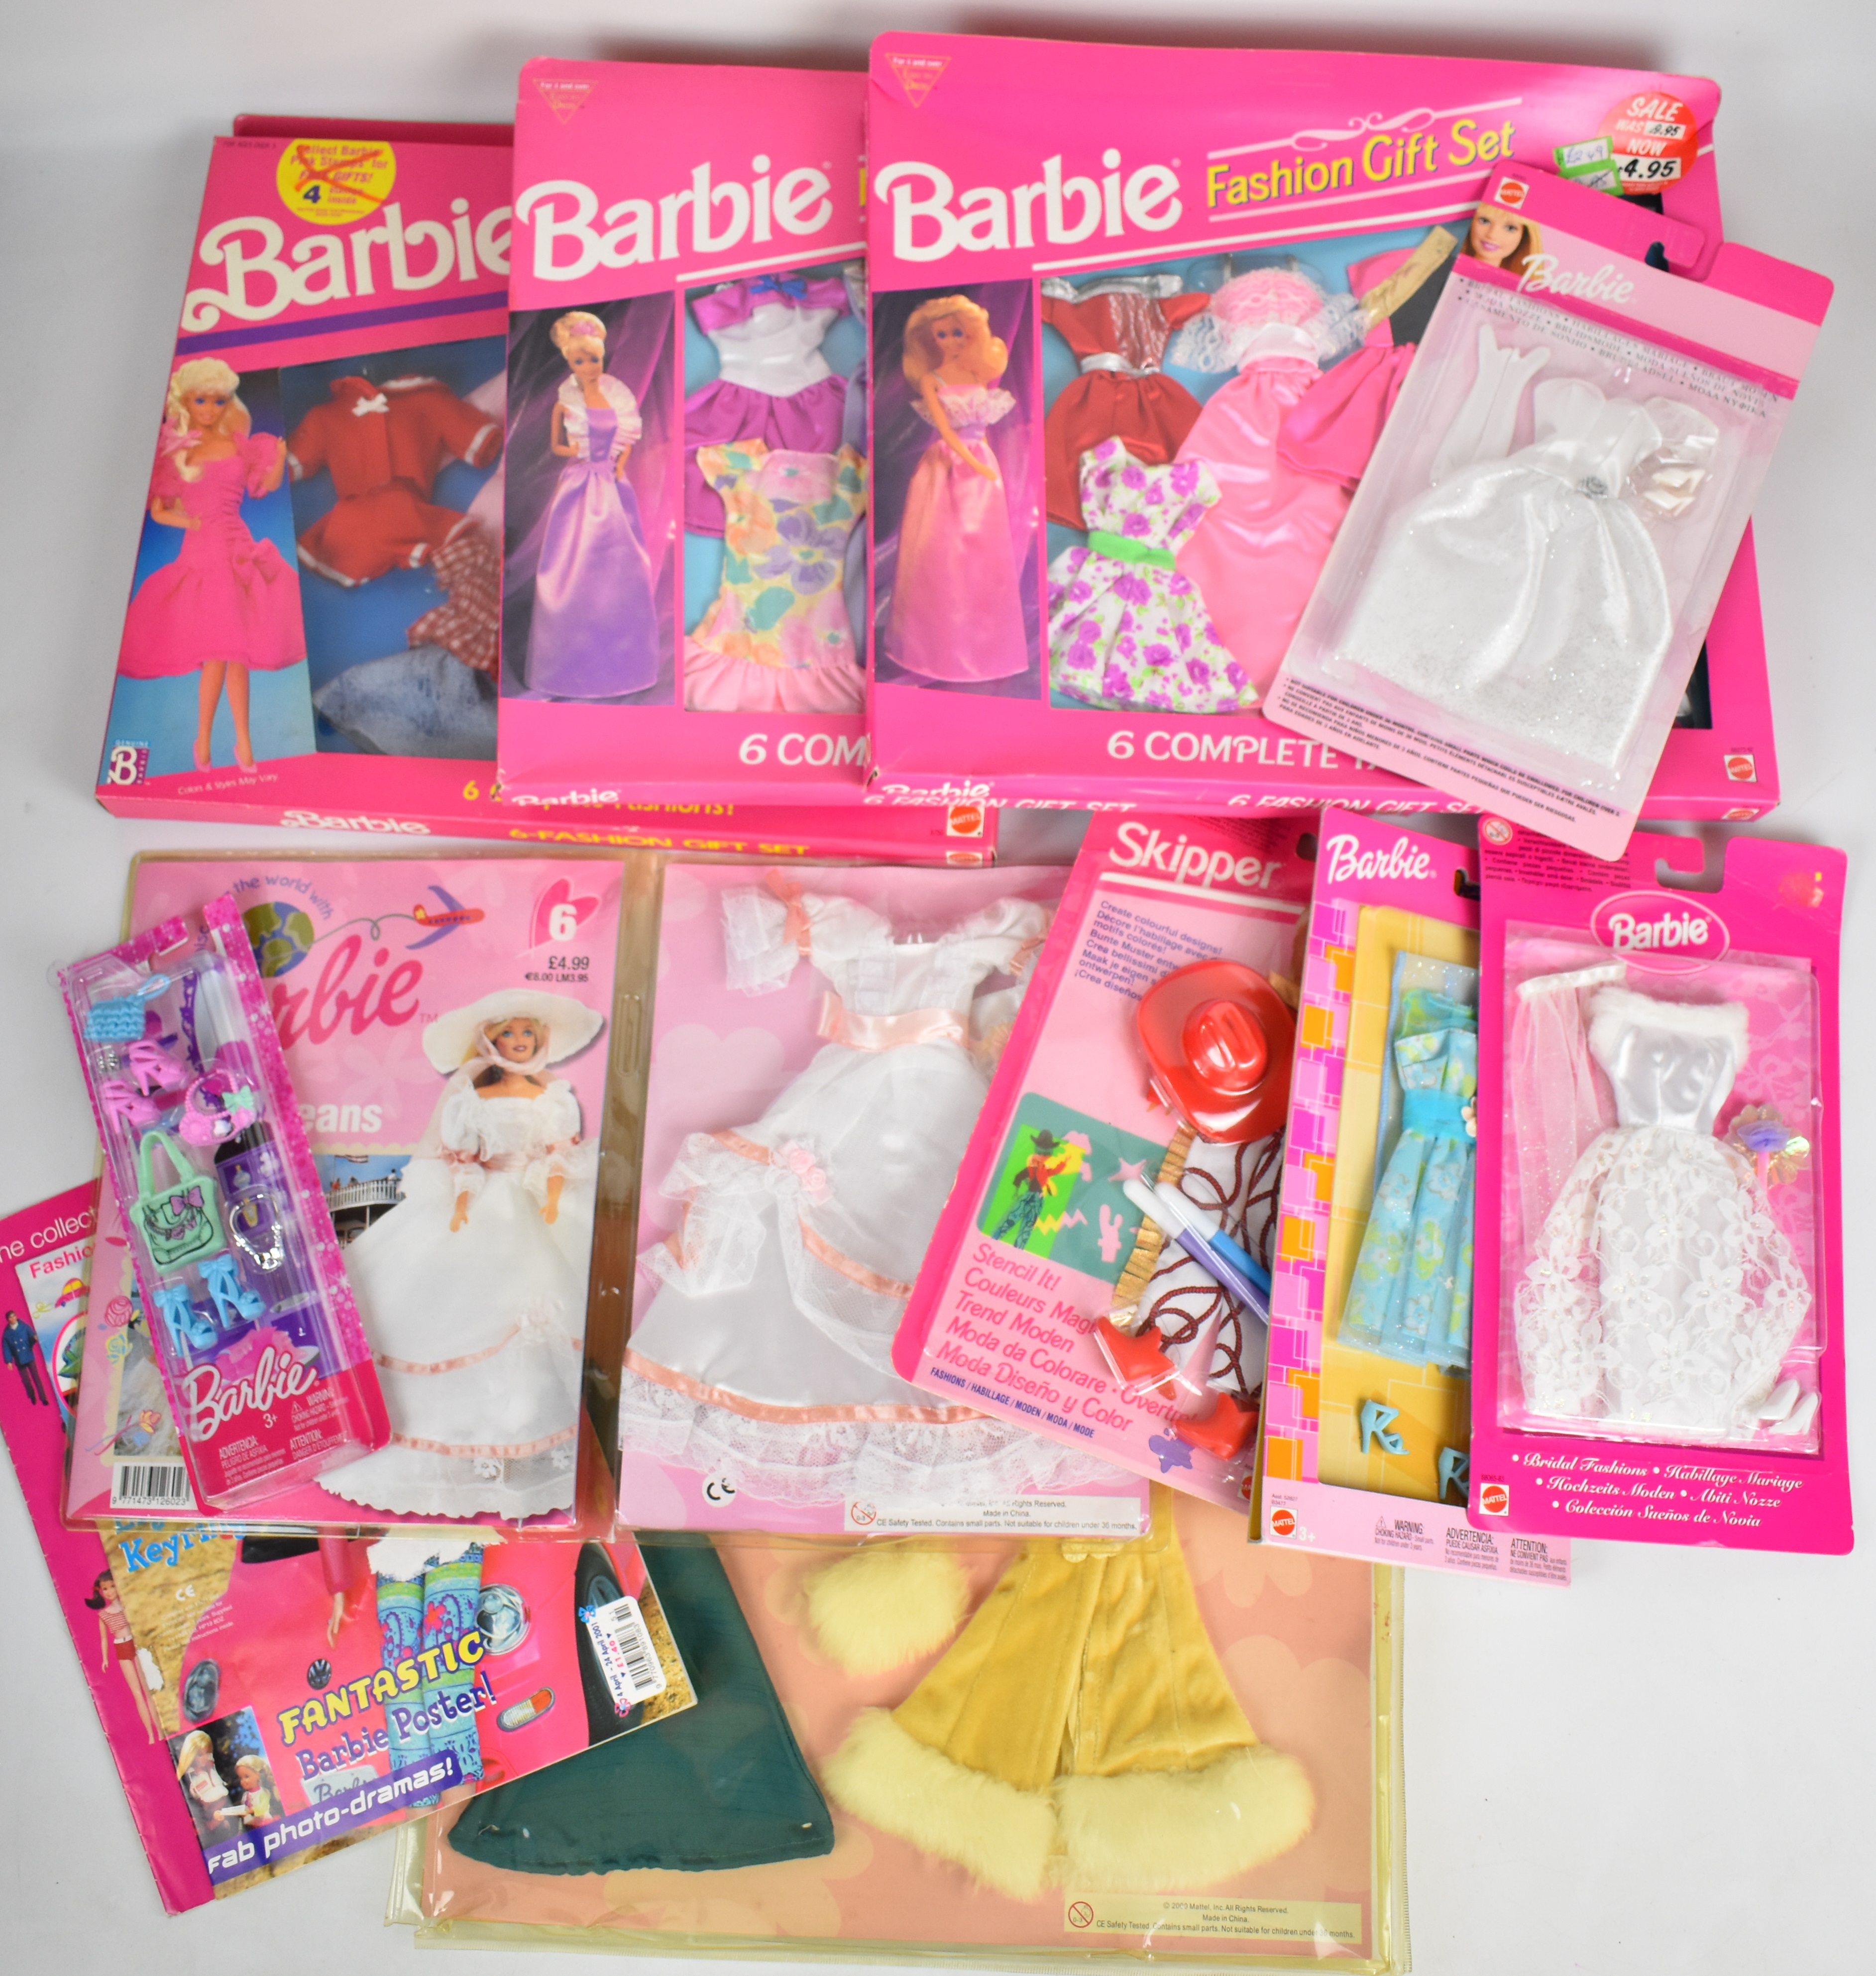 A collection of Barbie clothing and accessory sets by Mattel, all in original packaging.